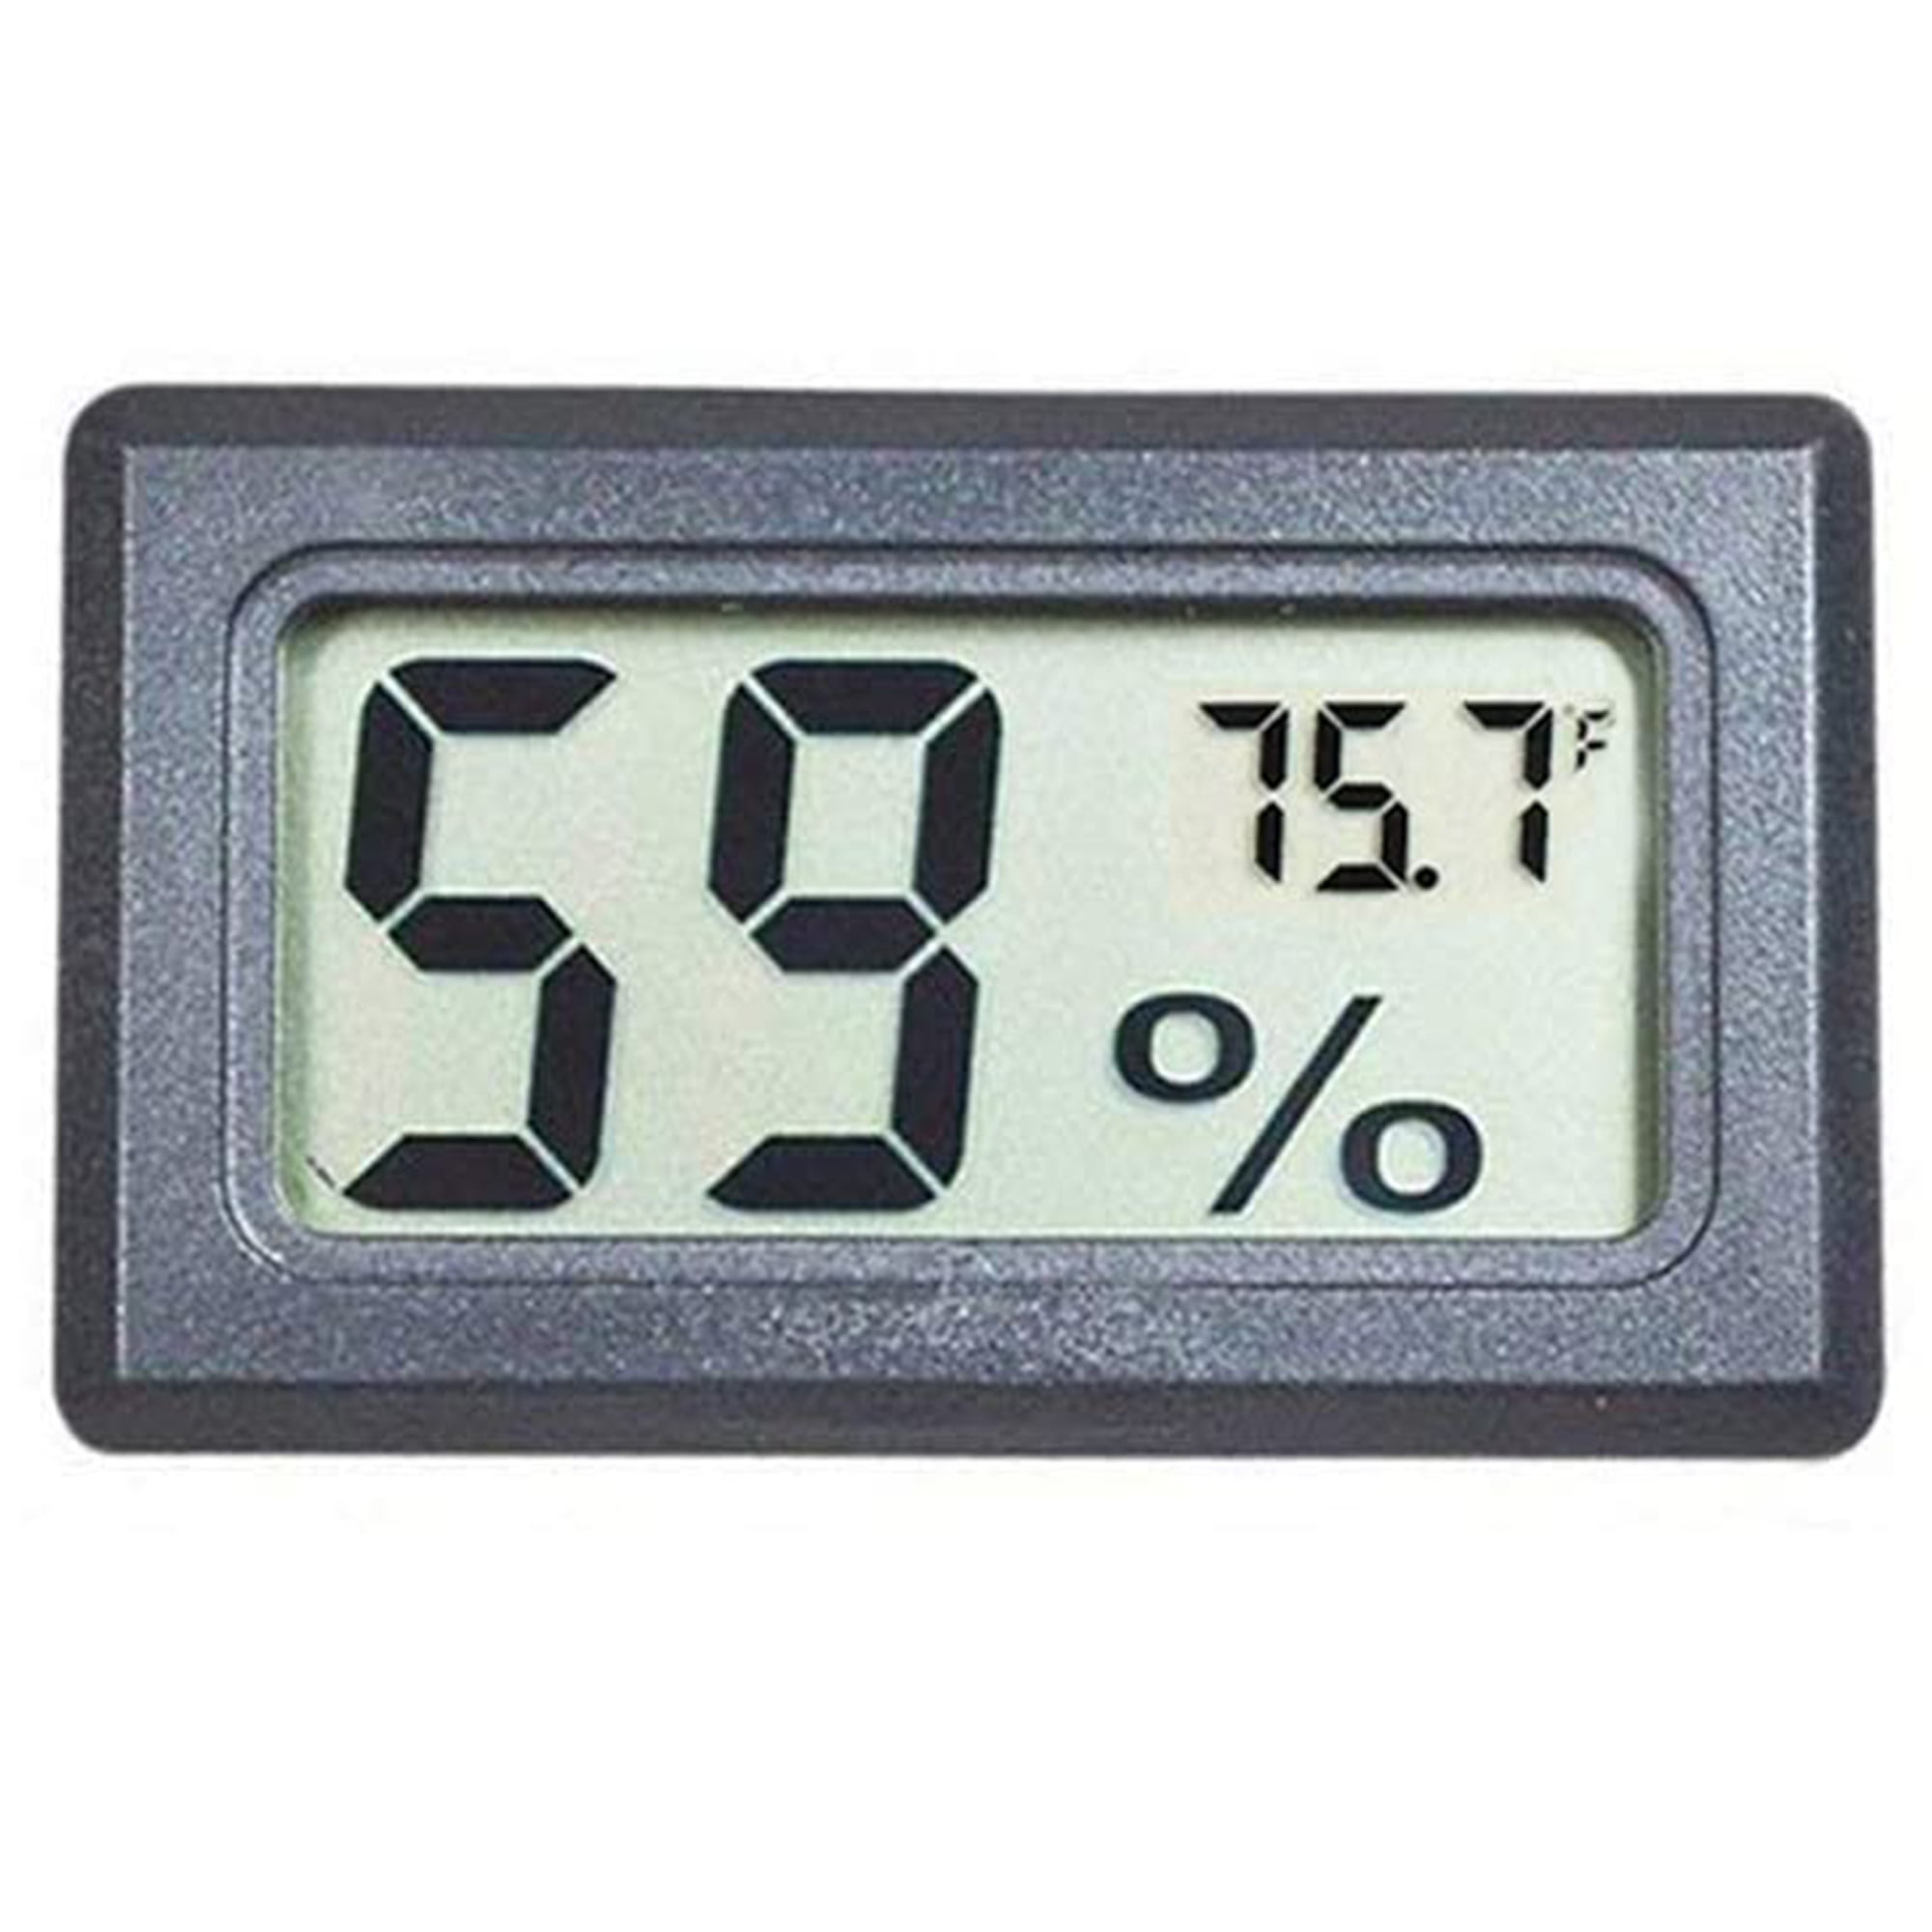 1 Pack No Battery Needed for Home Room Kitchen Patio Planting Room Reptile Terrariums Incubator BOEESPAT Mini Indoor Thermometer Hygrometer Temperature Humidity Monitor Gauge -White 